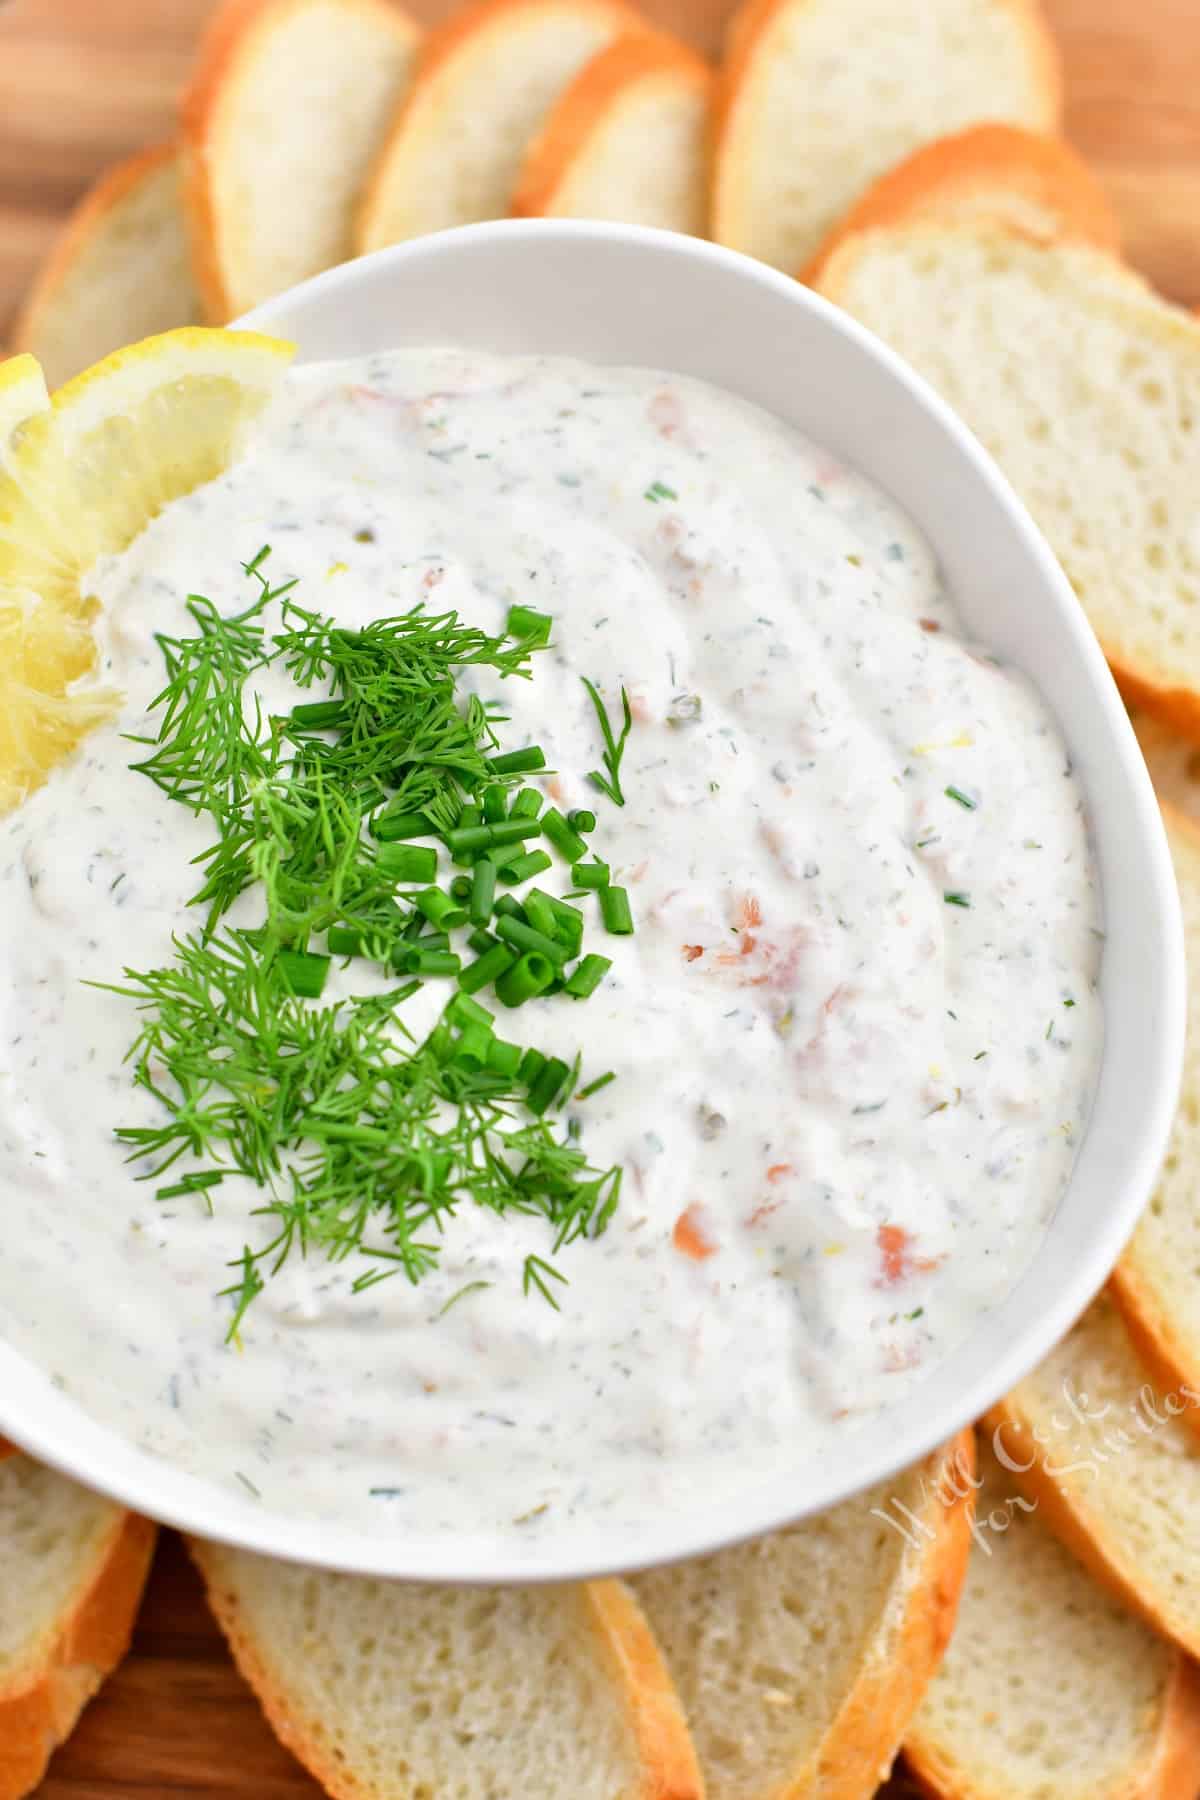 overhead image: white bowl filled with creamy white dip garnished with dill and lemon slice